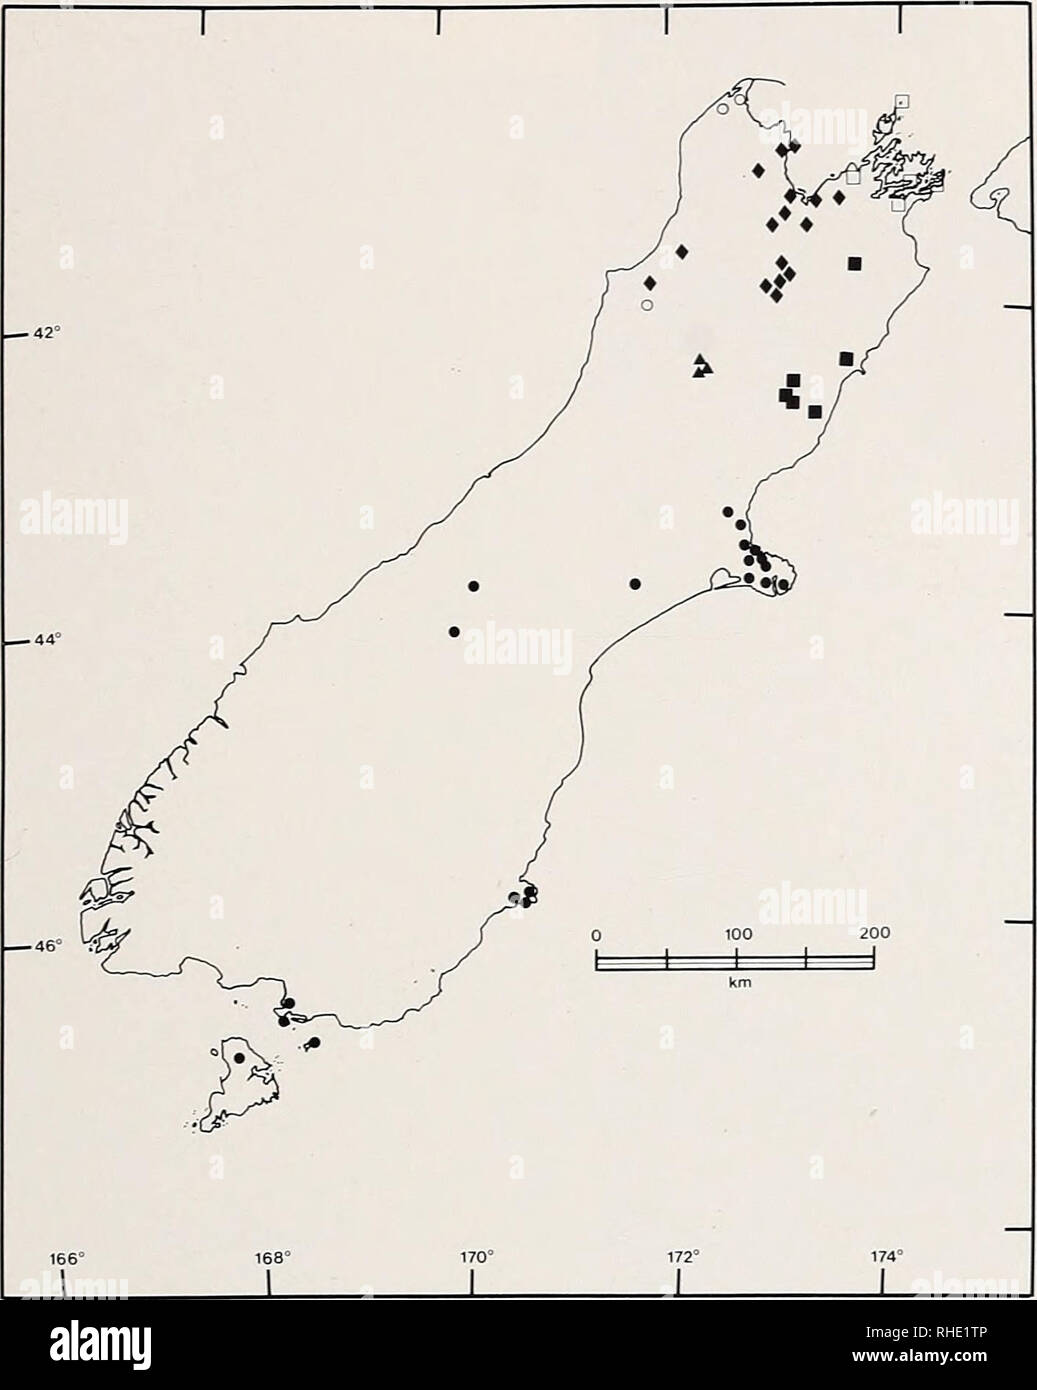 . Bonner zoologische Monographien. Zoology. 133. Fig.51: Distribution of members of the genus Naiiltinus in the South Island of New Zealand. Naultinus gemmeiis (closed circles), A^^ mamikanus (open squares), N. poecilochloris (clos- ed triangles), N. rudis (closed squares), TV. stellatiis (closed diamonds), N. tuberculatiis (open circle). stated that this gecko lives in trees. Like most other Naultinus, this species typically in- habits Leptospermum (Robb 1980a; McCallum 1981; Hitchmough 1982b). Population density on the Karikari Peninsula was estimated at 55 individuals/hectare (Hitchmough 19 Stock Photo